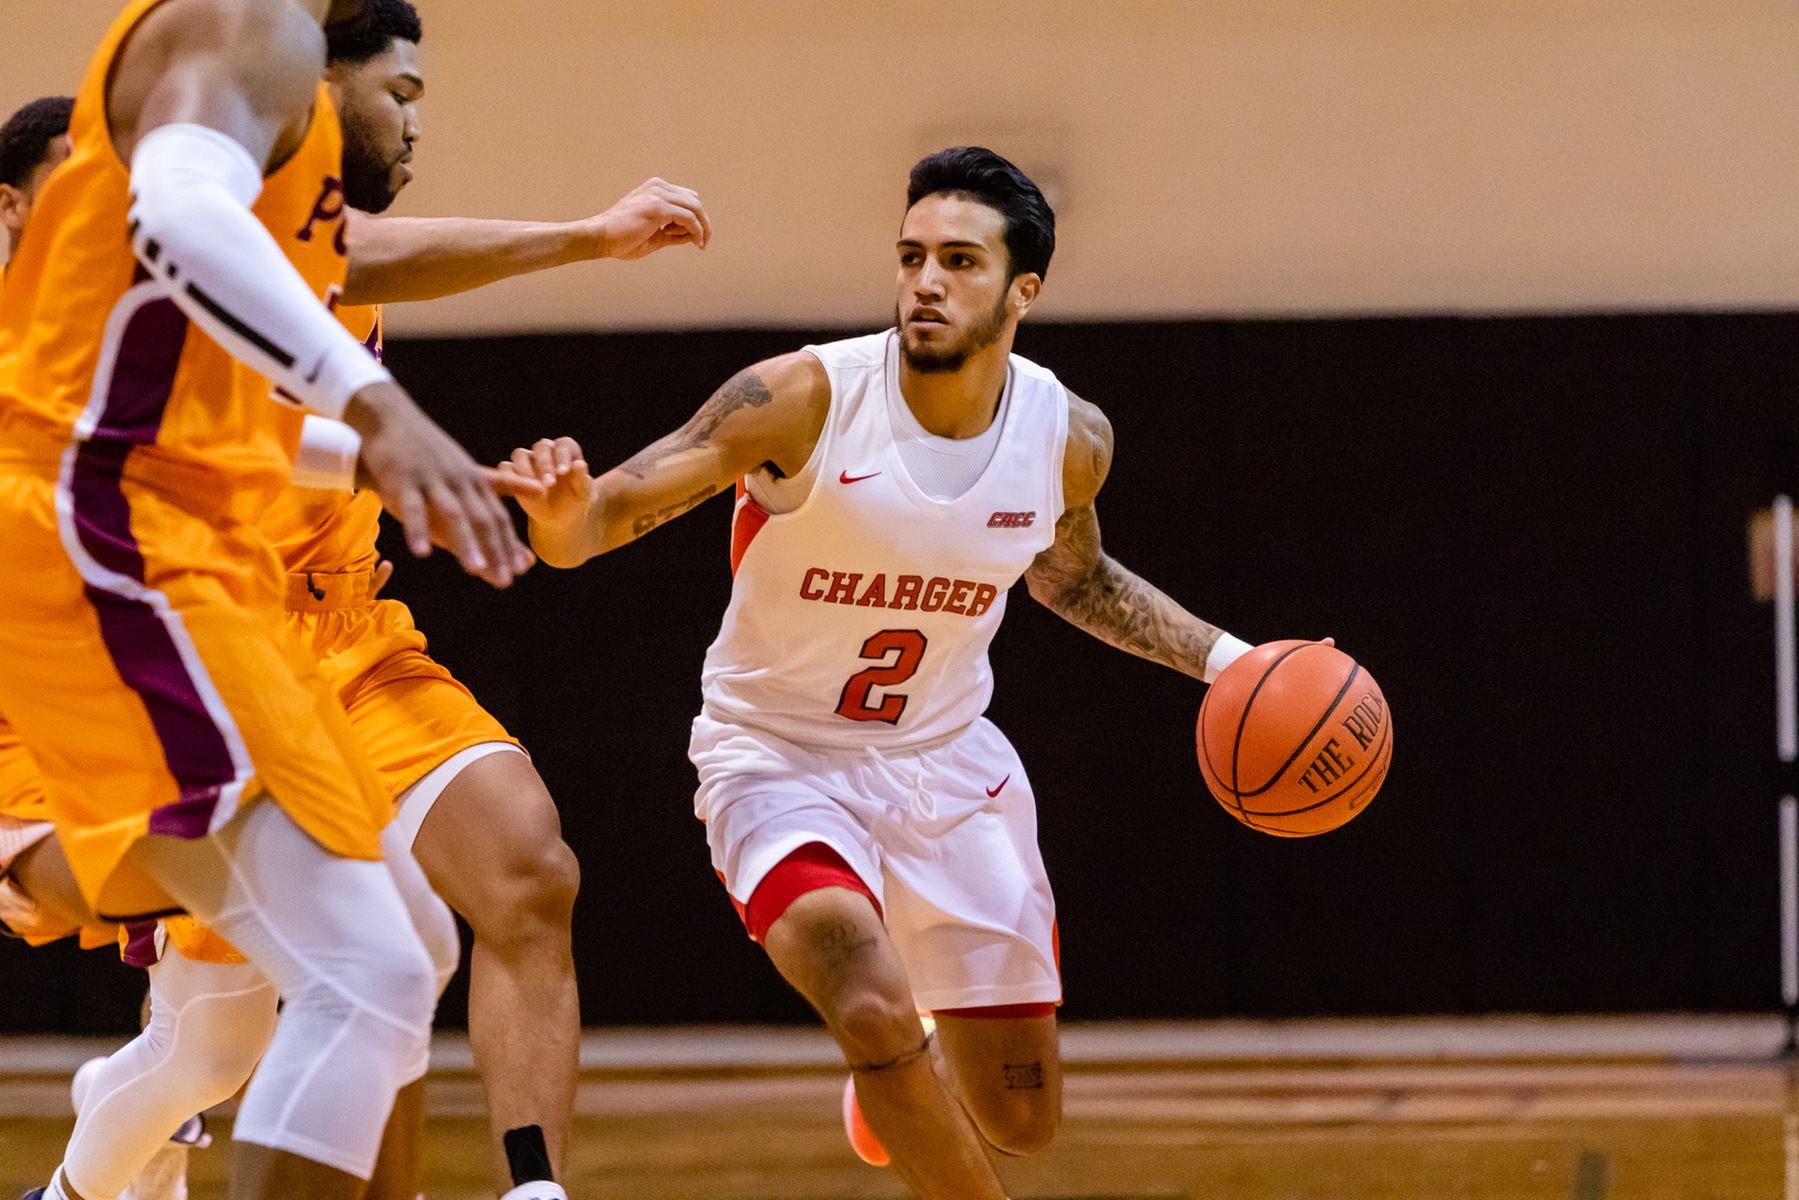 CHARGERS IMPROVE TO 4-0 AFTER NON-CONFERENCE WIN OVER THE COLLEGE OF ST ROSE